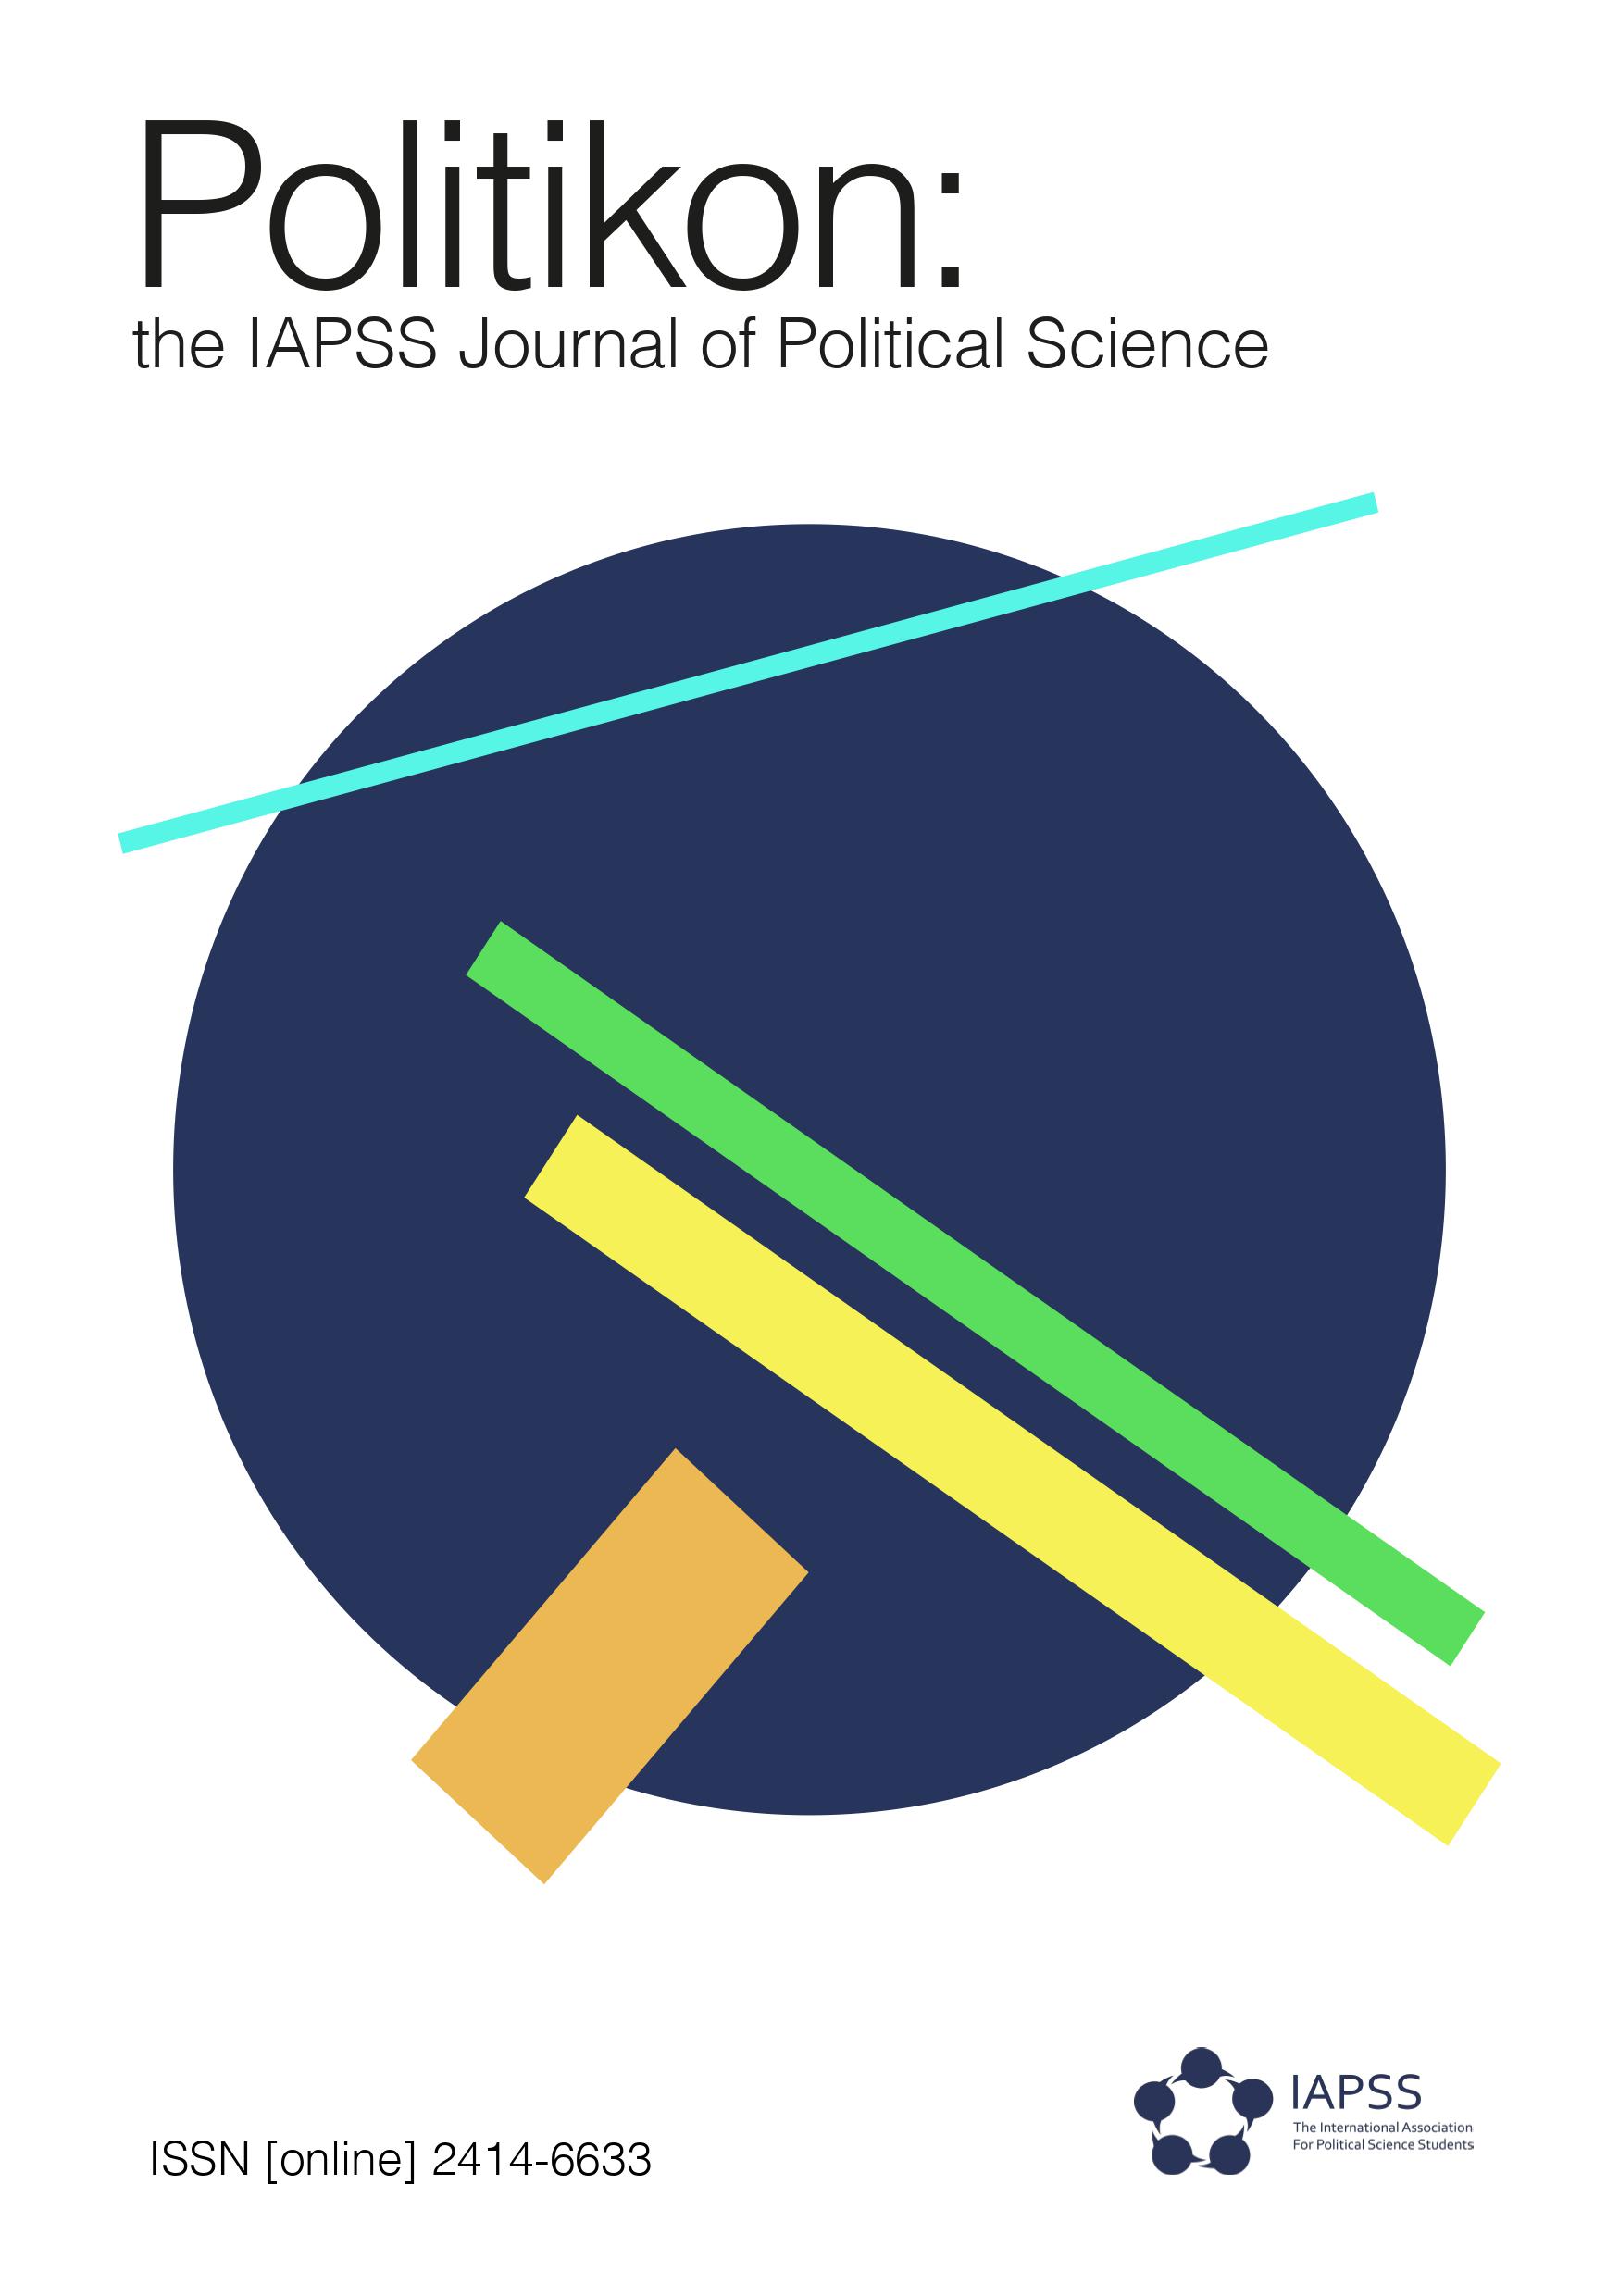 Cover page with the title of the journal Politikon: the IAPSS Journal of Political Science